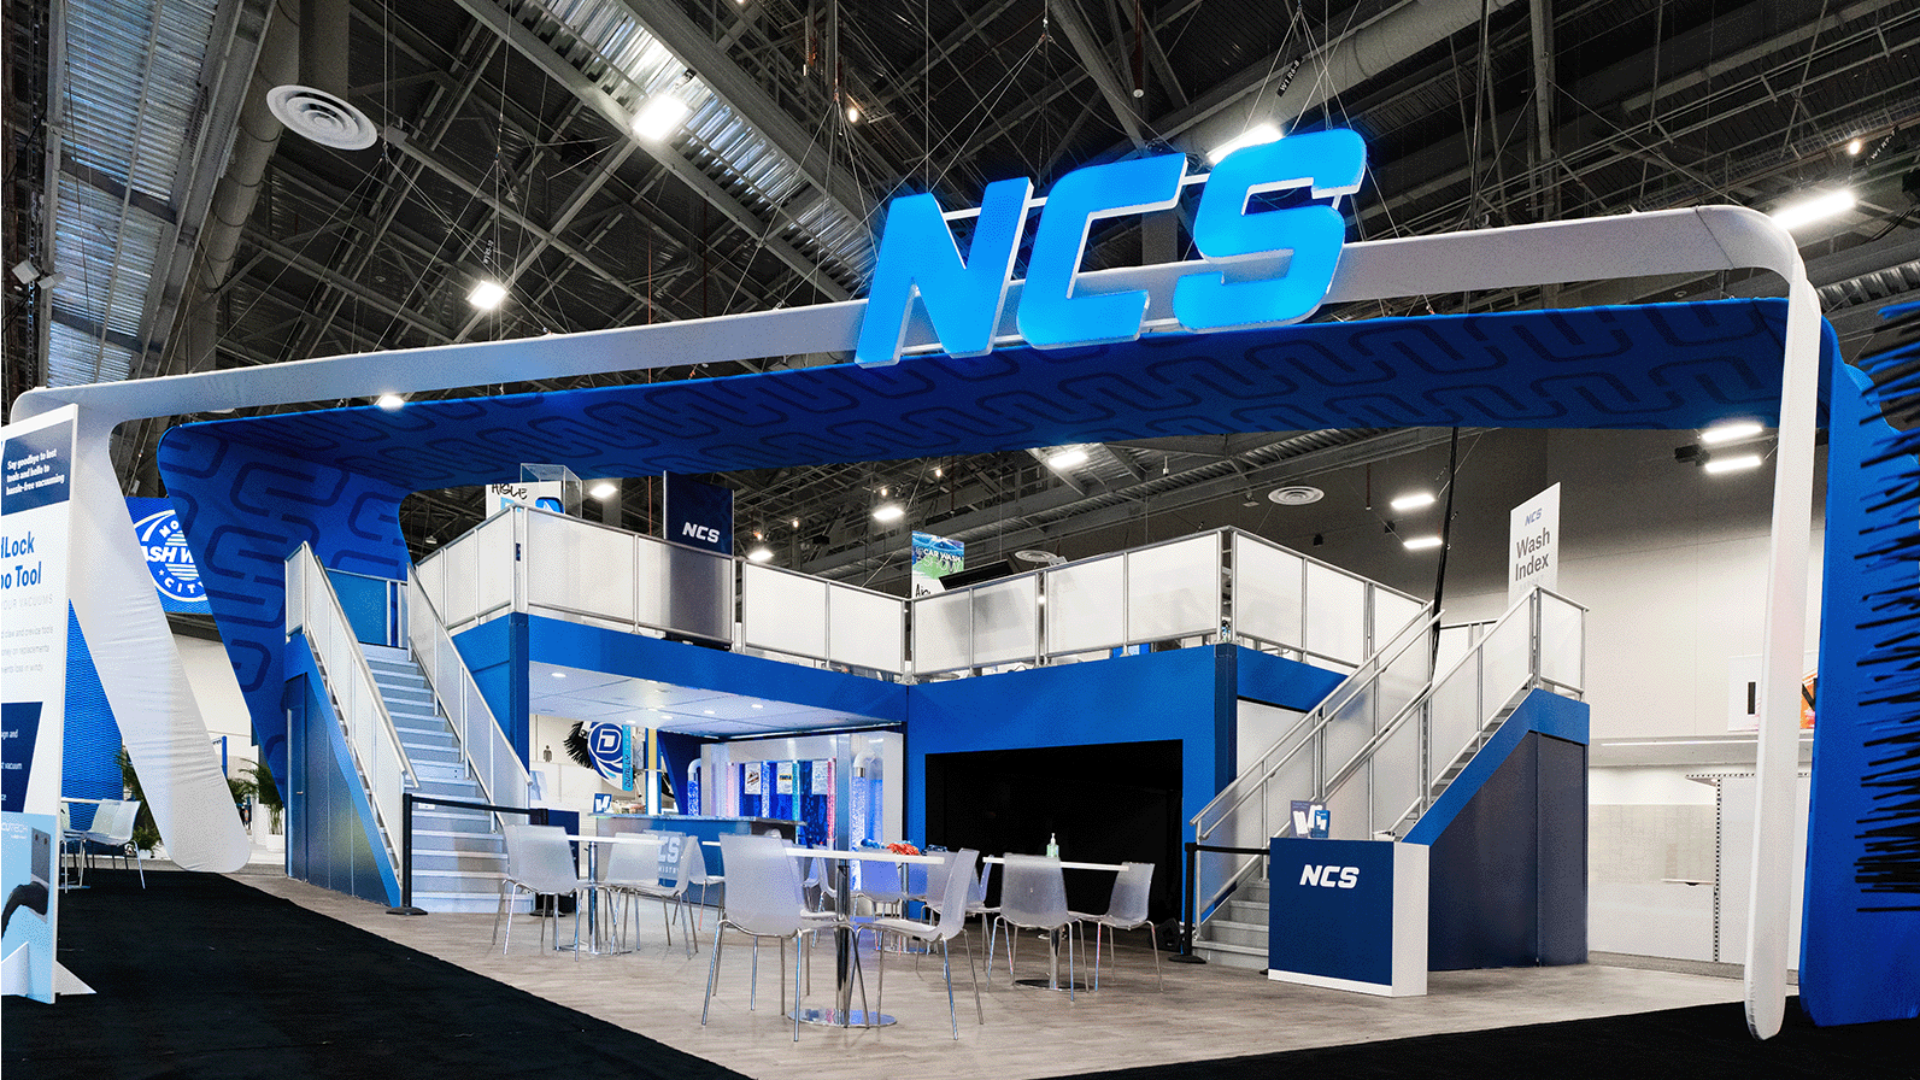 blue and white tradeshow booth with open floor plan, stair, and big NCS neon sign